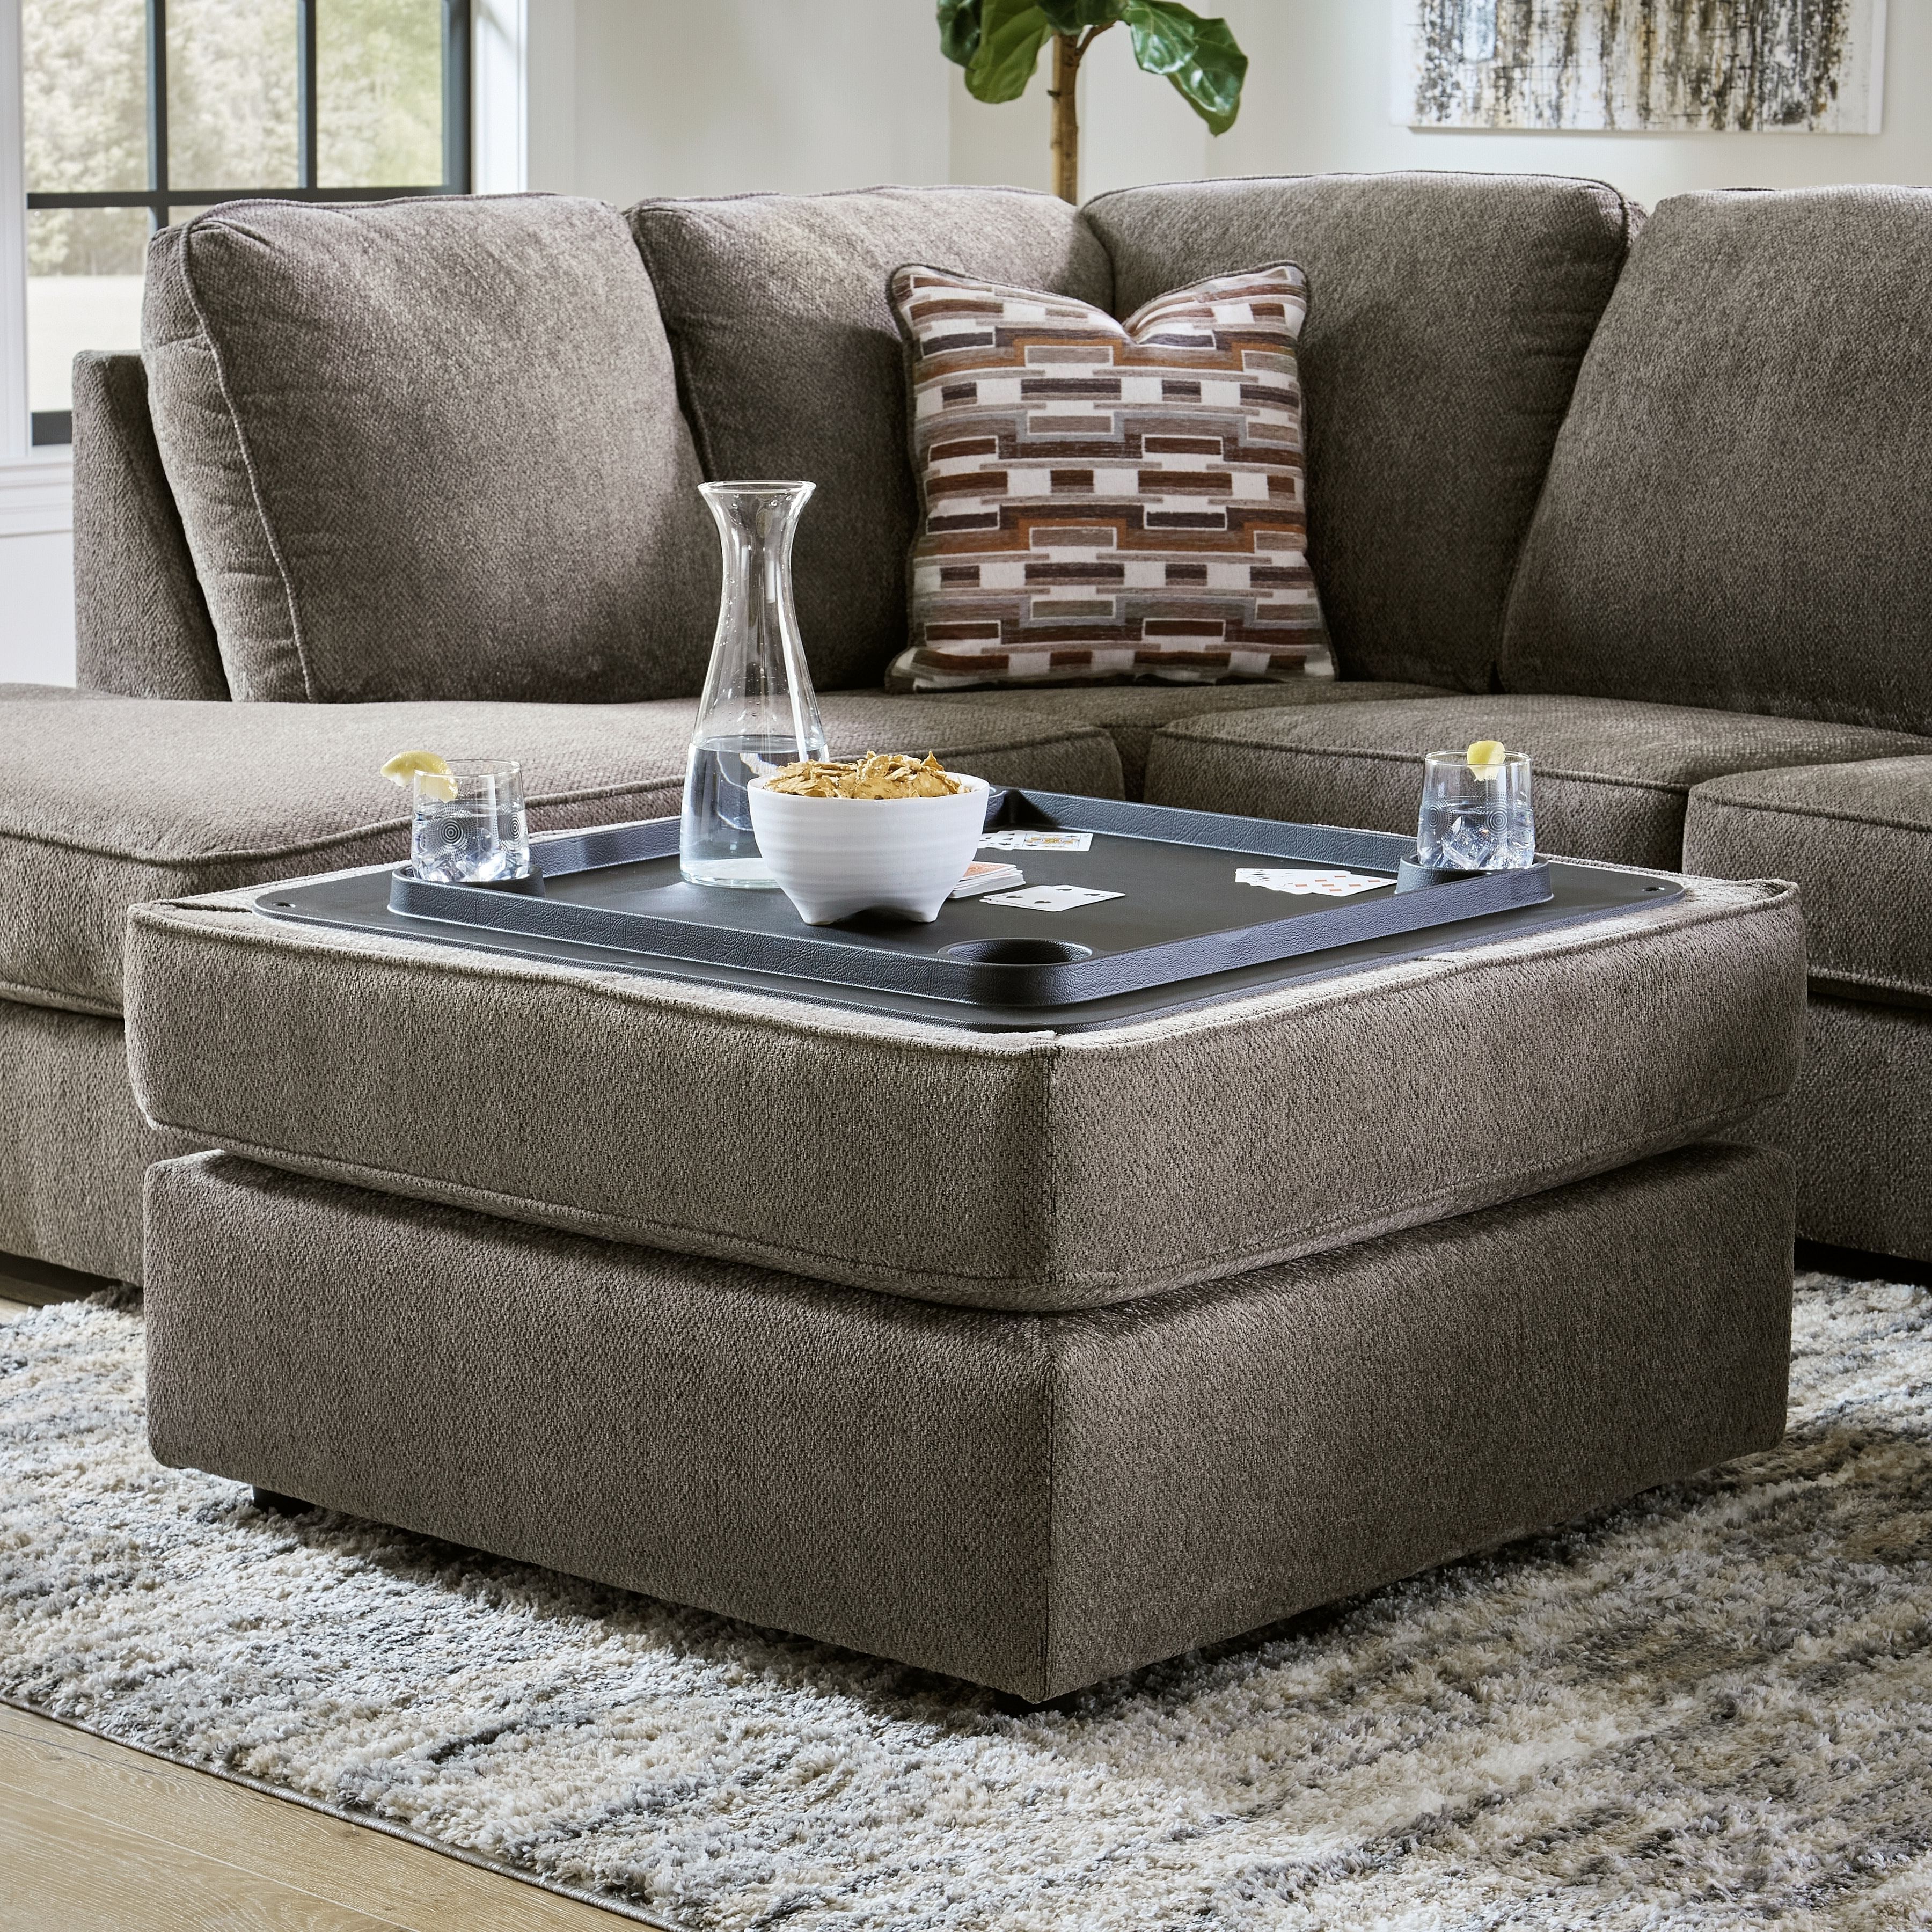 Living Room Ottomans Ashley Living Room O'phannon Ottoman With Storage  2940211 At Istyle Furniture Store With Sofa Set With Storage Tray Ottoman (Gallery 10 of 20)